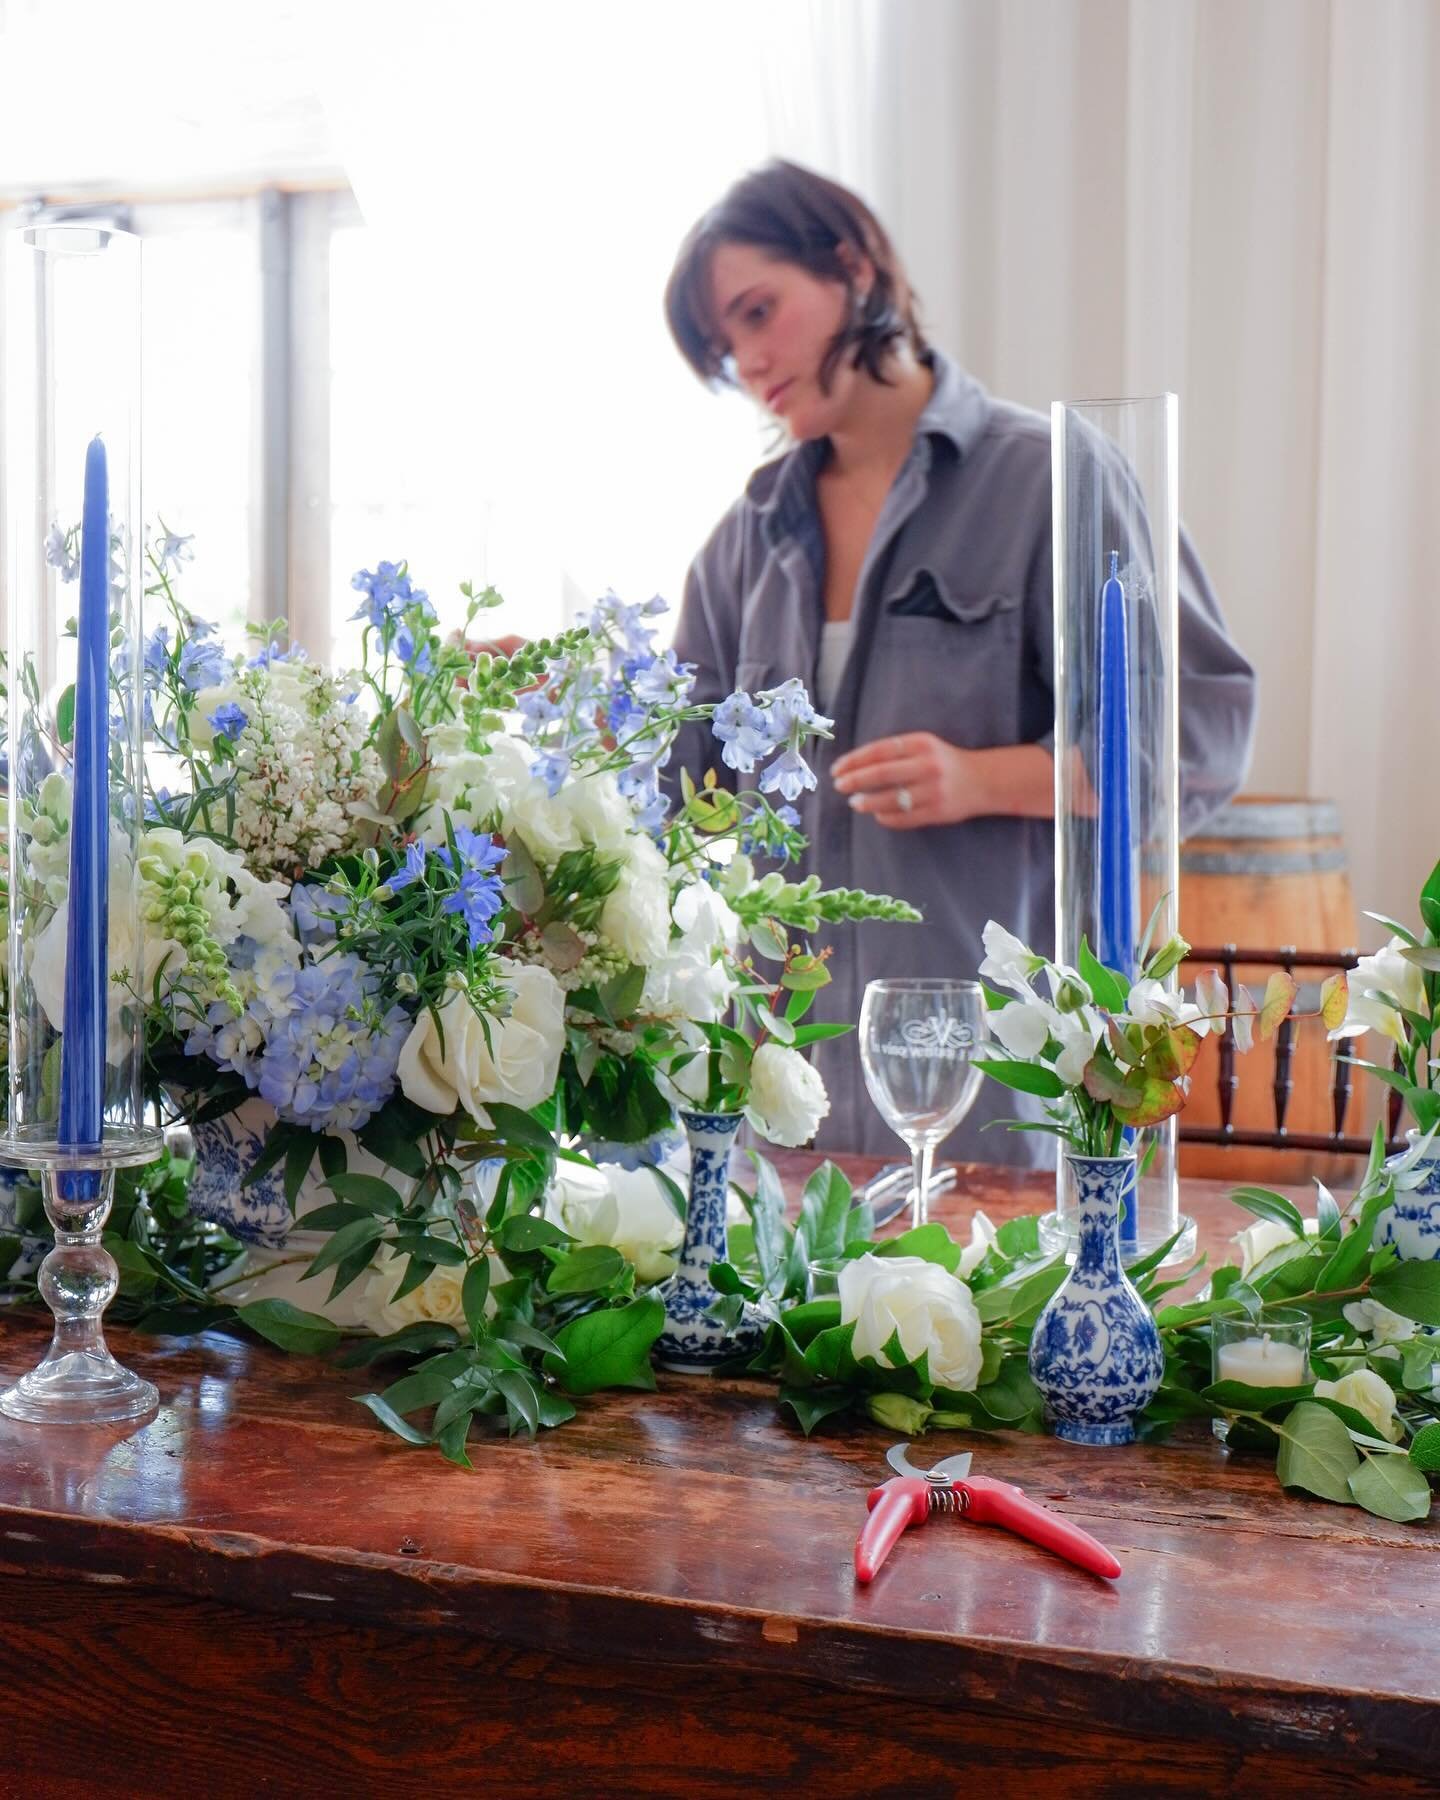 Behind the scenes on site with our talented floral designers!

Venue: @veritasweddings